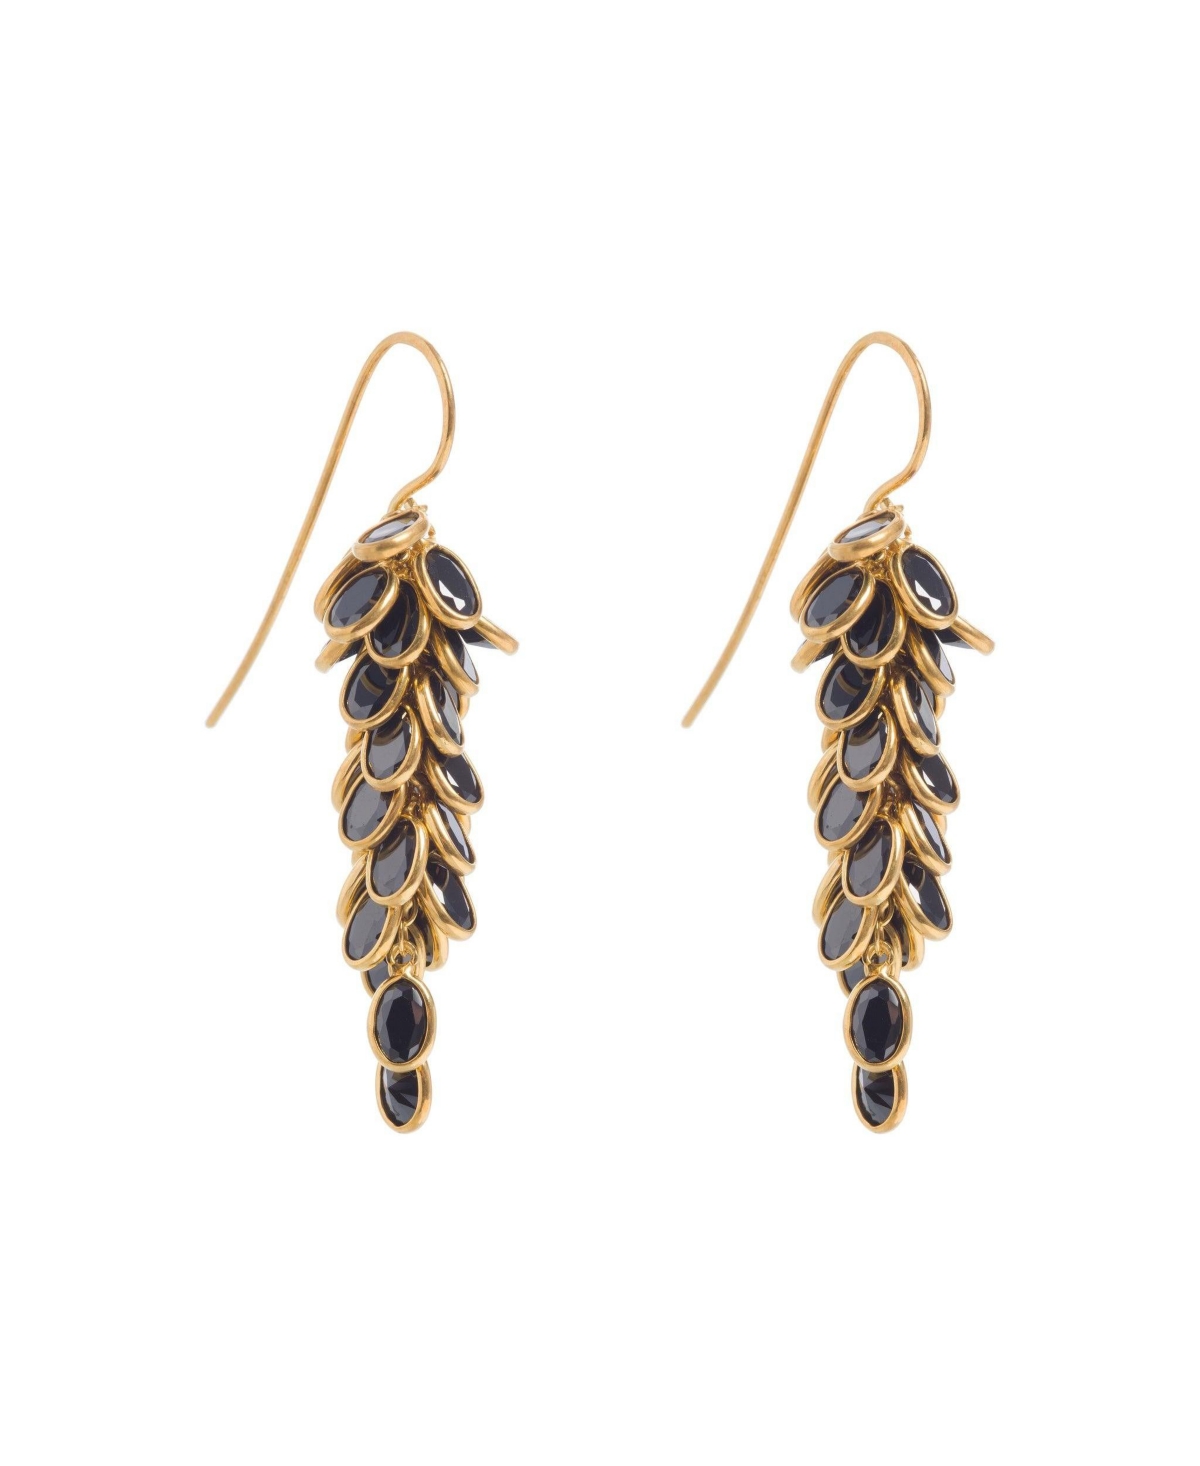 Gold And Black Midi Crystal Drop Earrings - Gold